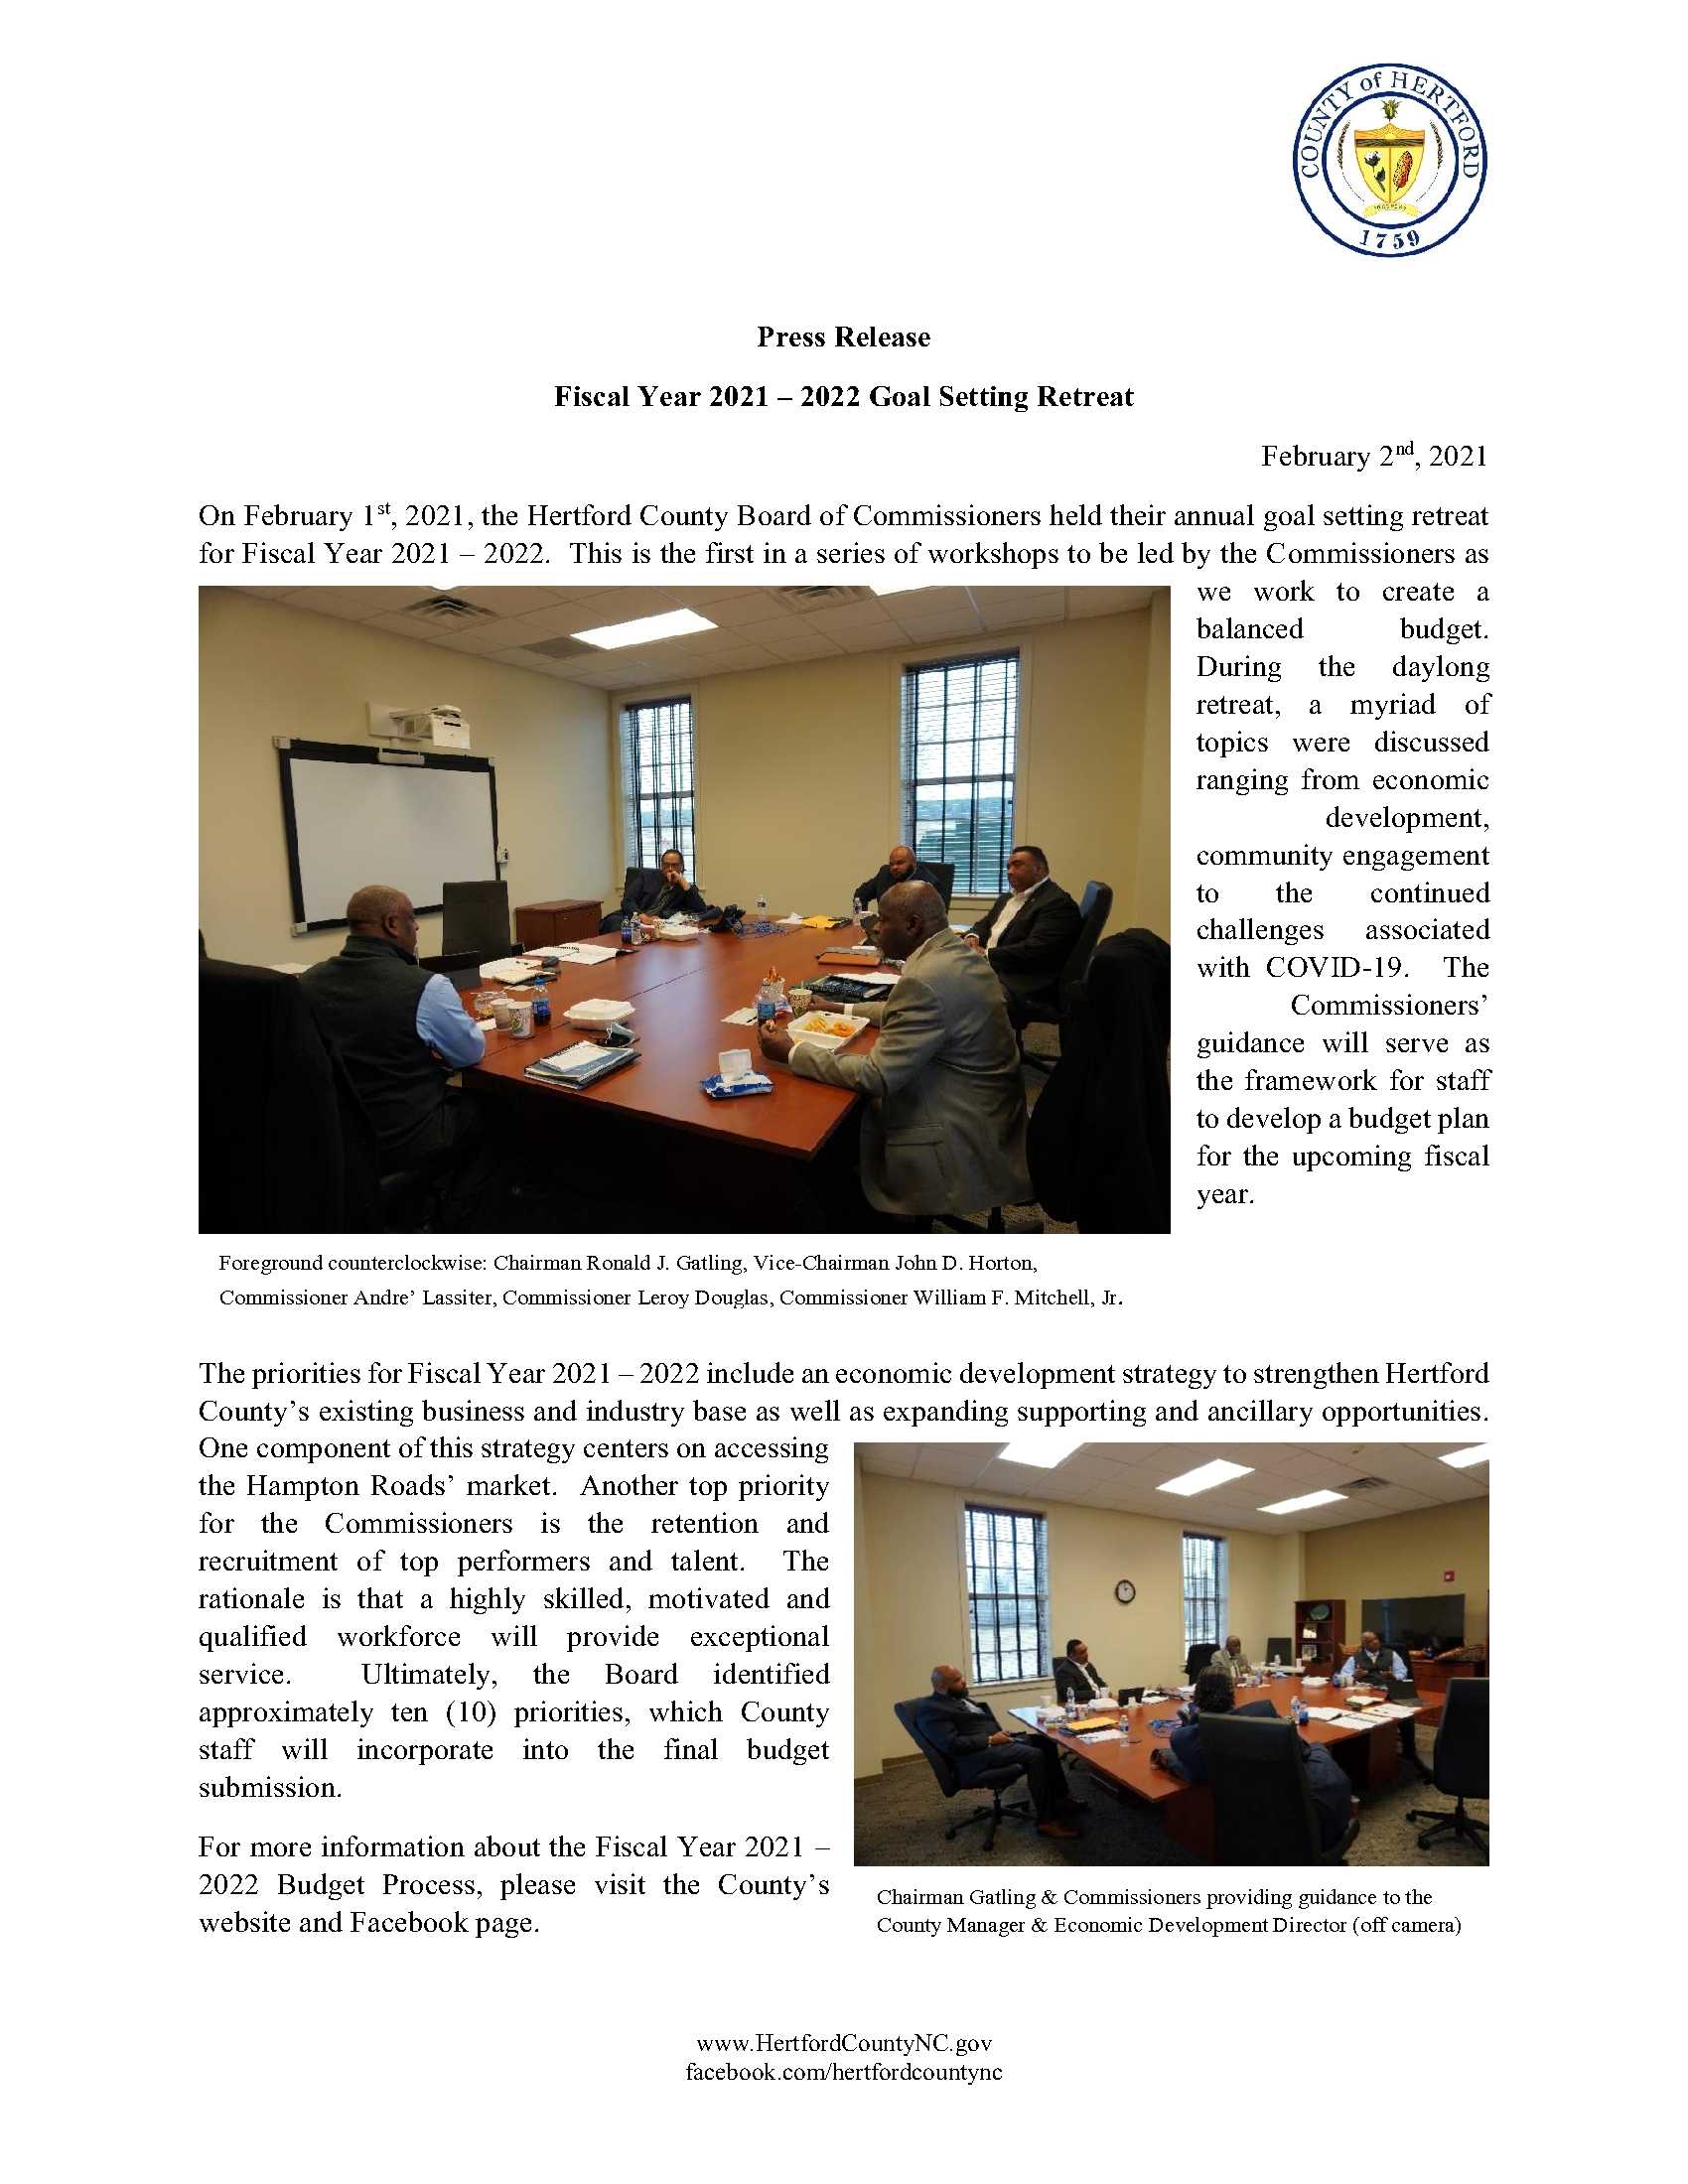 Hertford County FY 21-22 Budget Retreat Press Release 020221